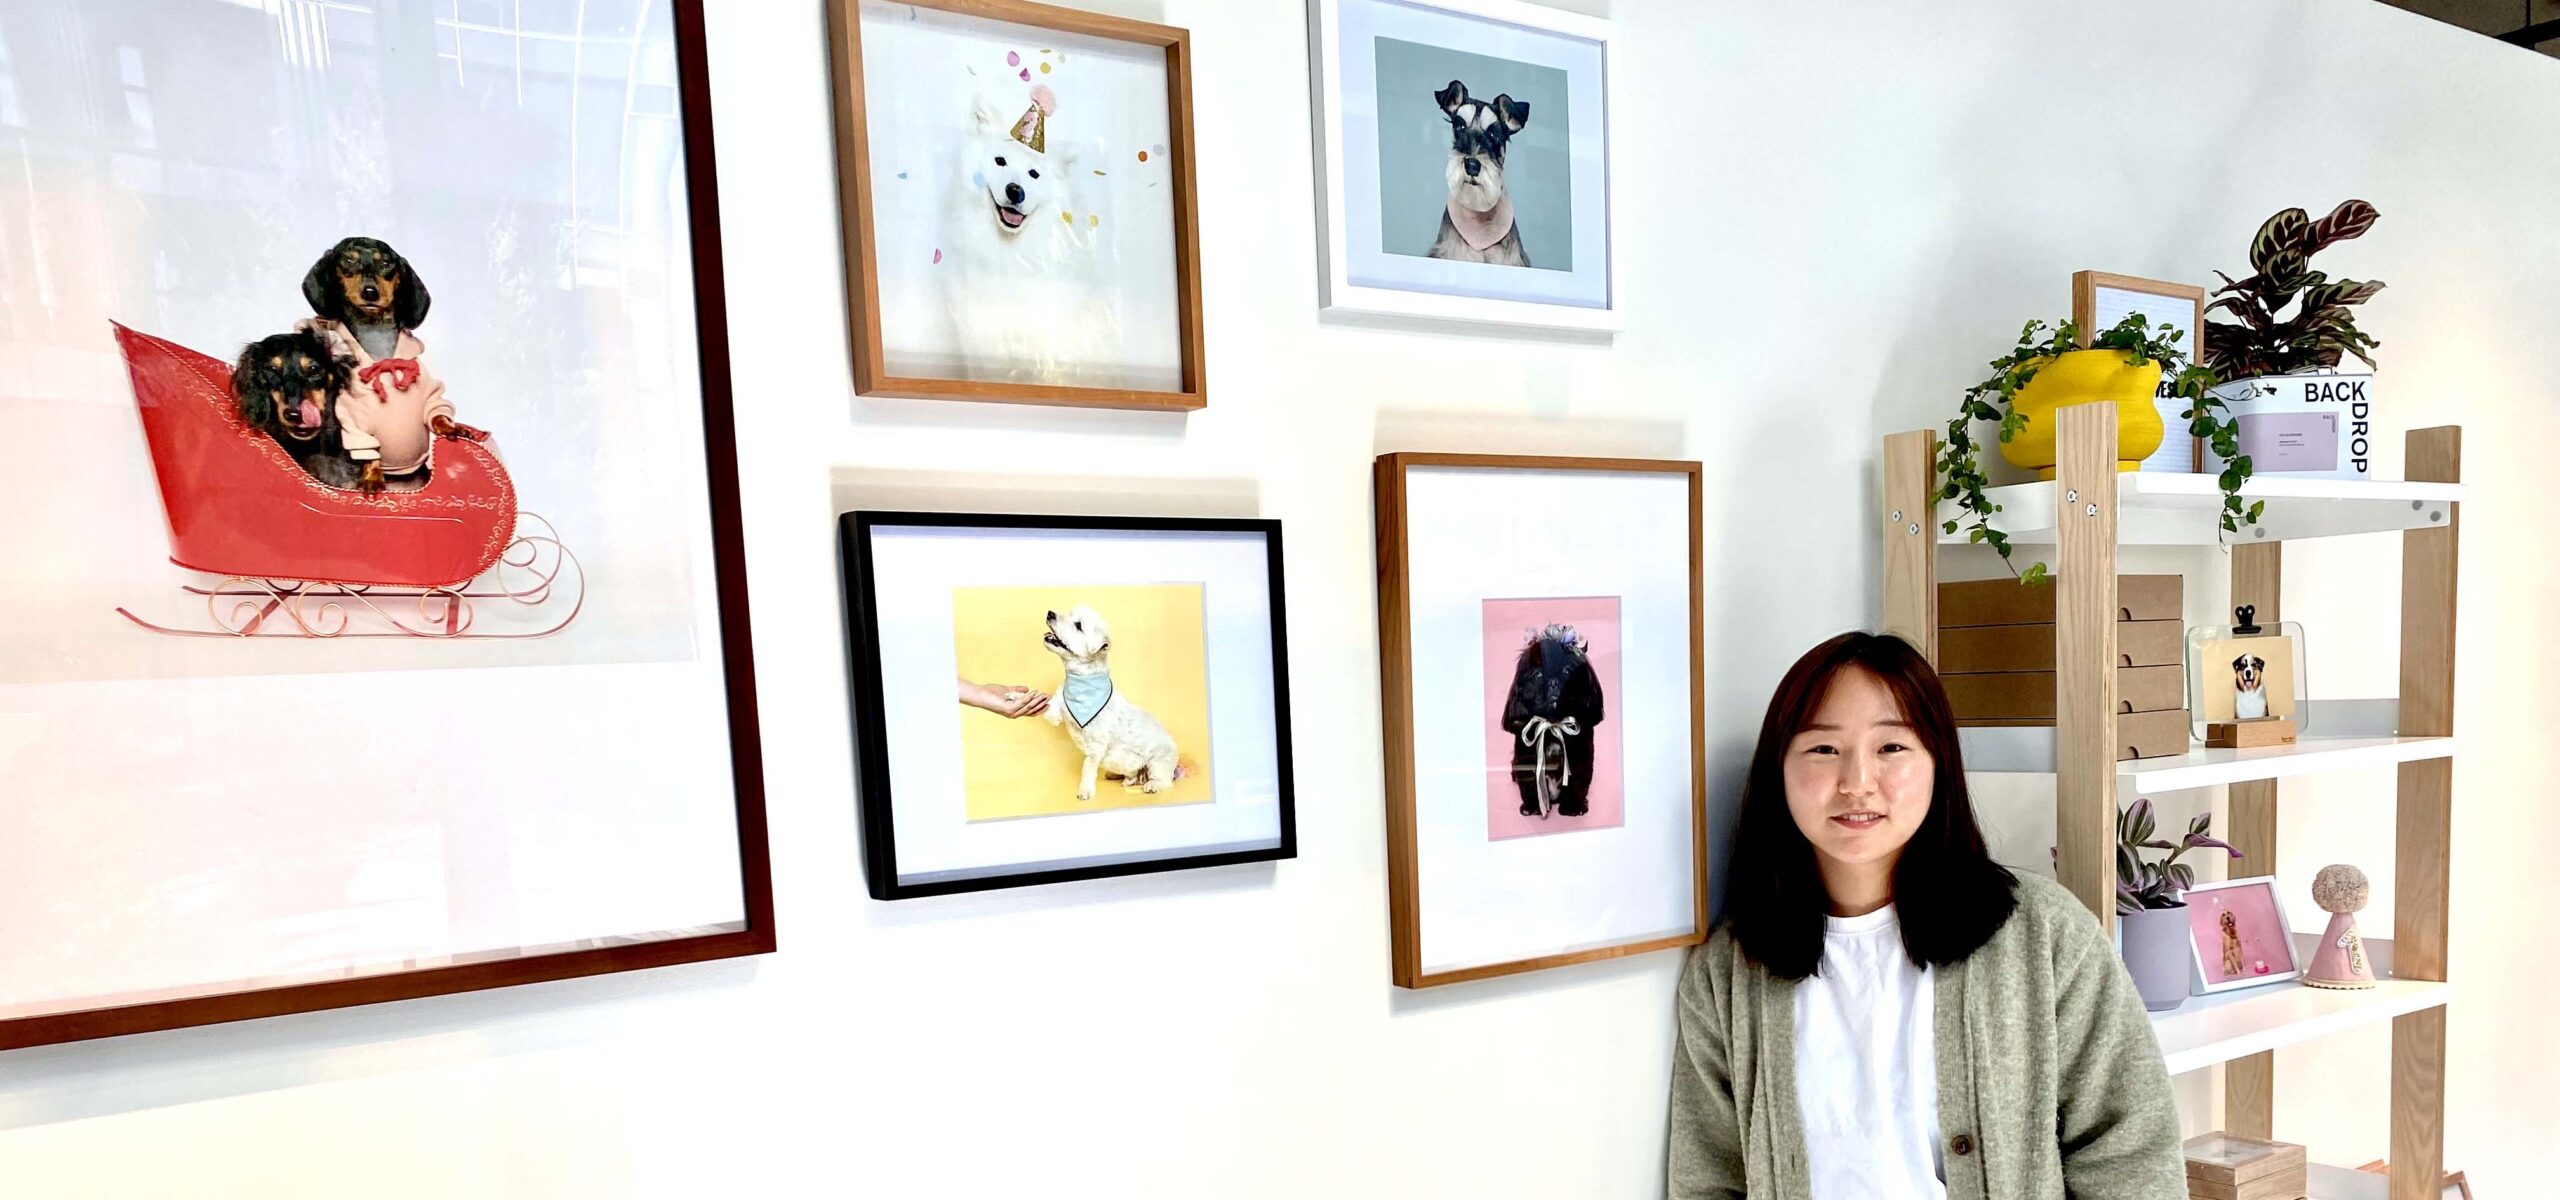 Woman standing by photos of dogs.